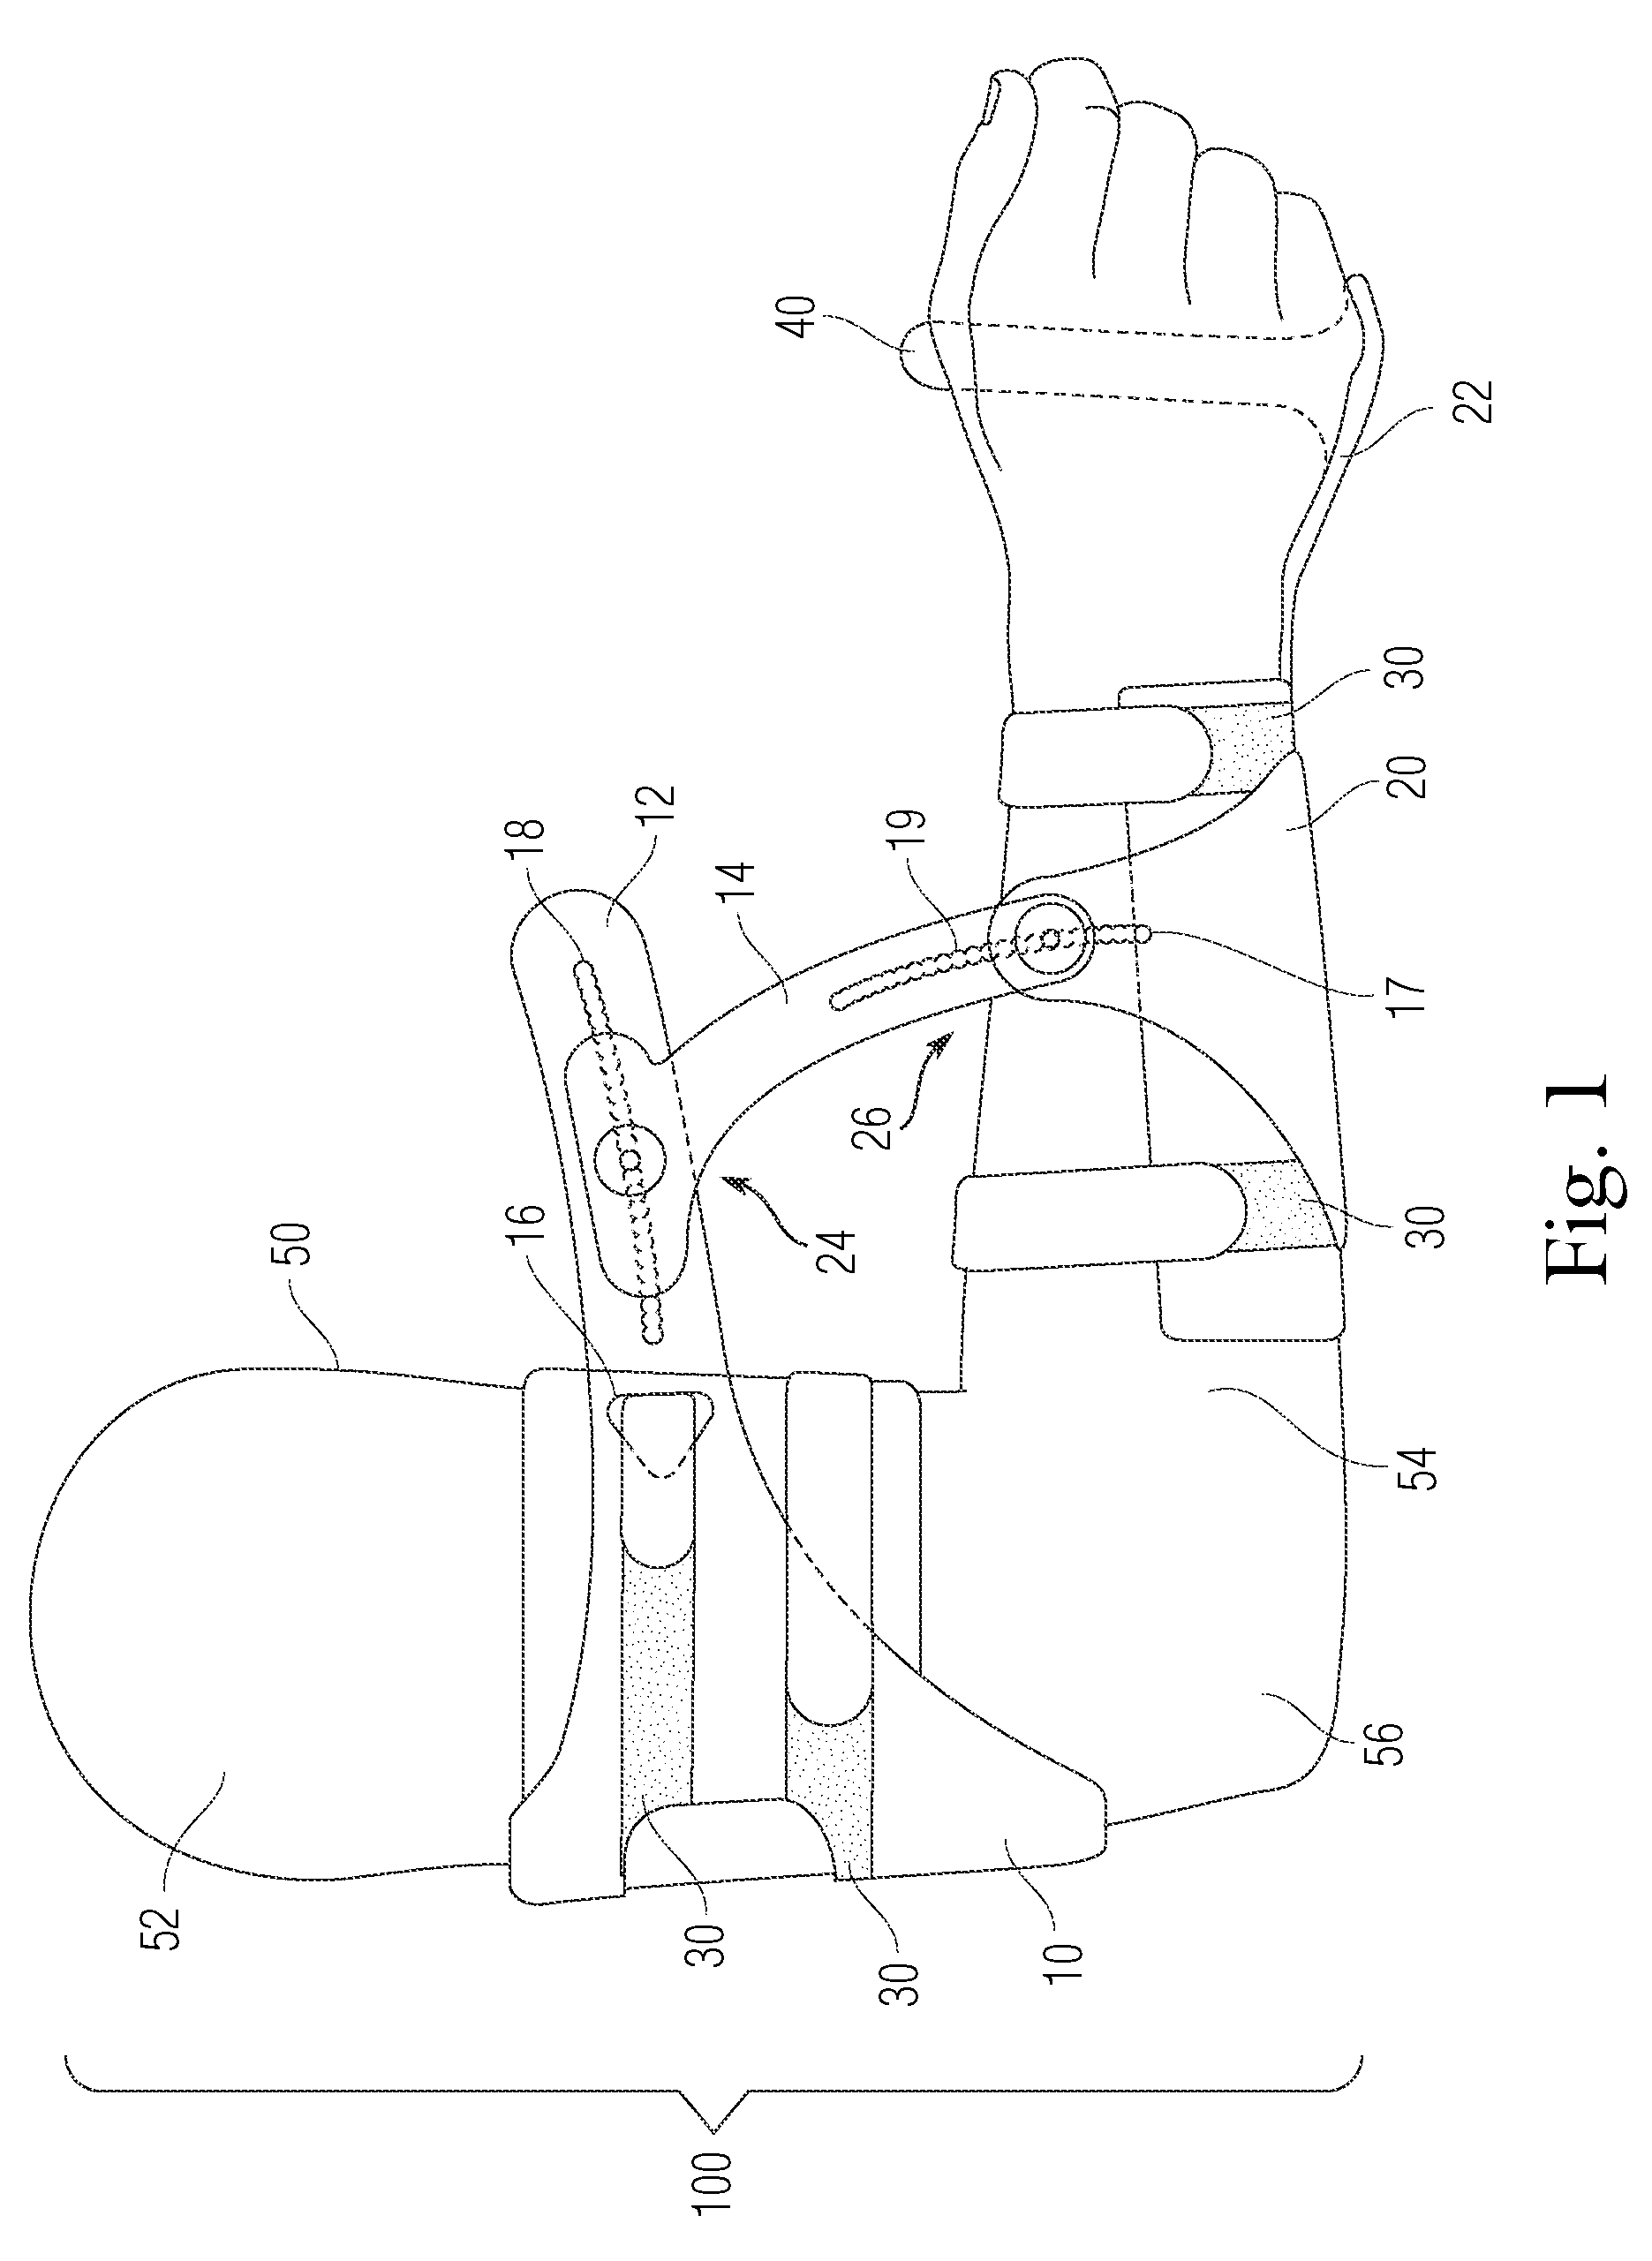 Extremity support apparatus and method